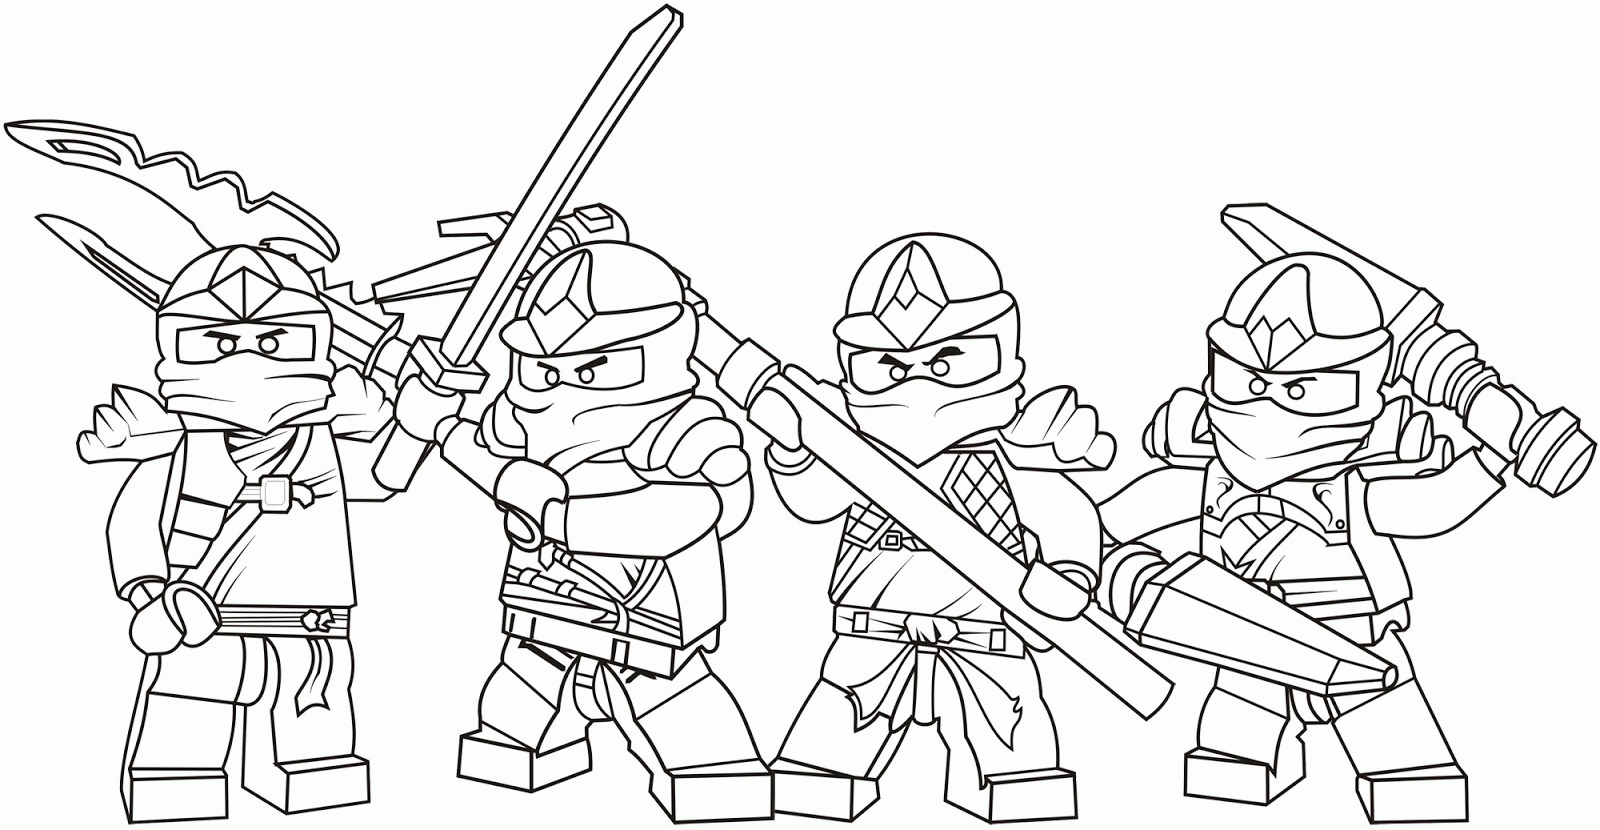 Coloring Pages Ninjago Lego   Coloring Home